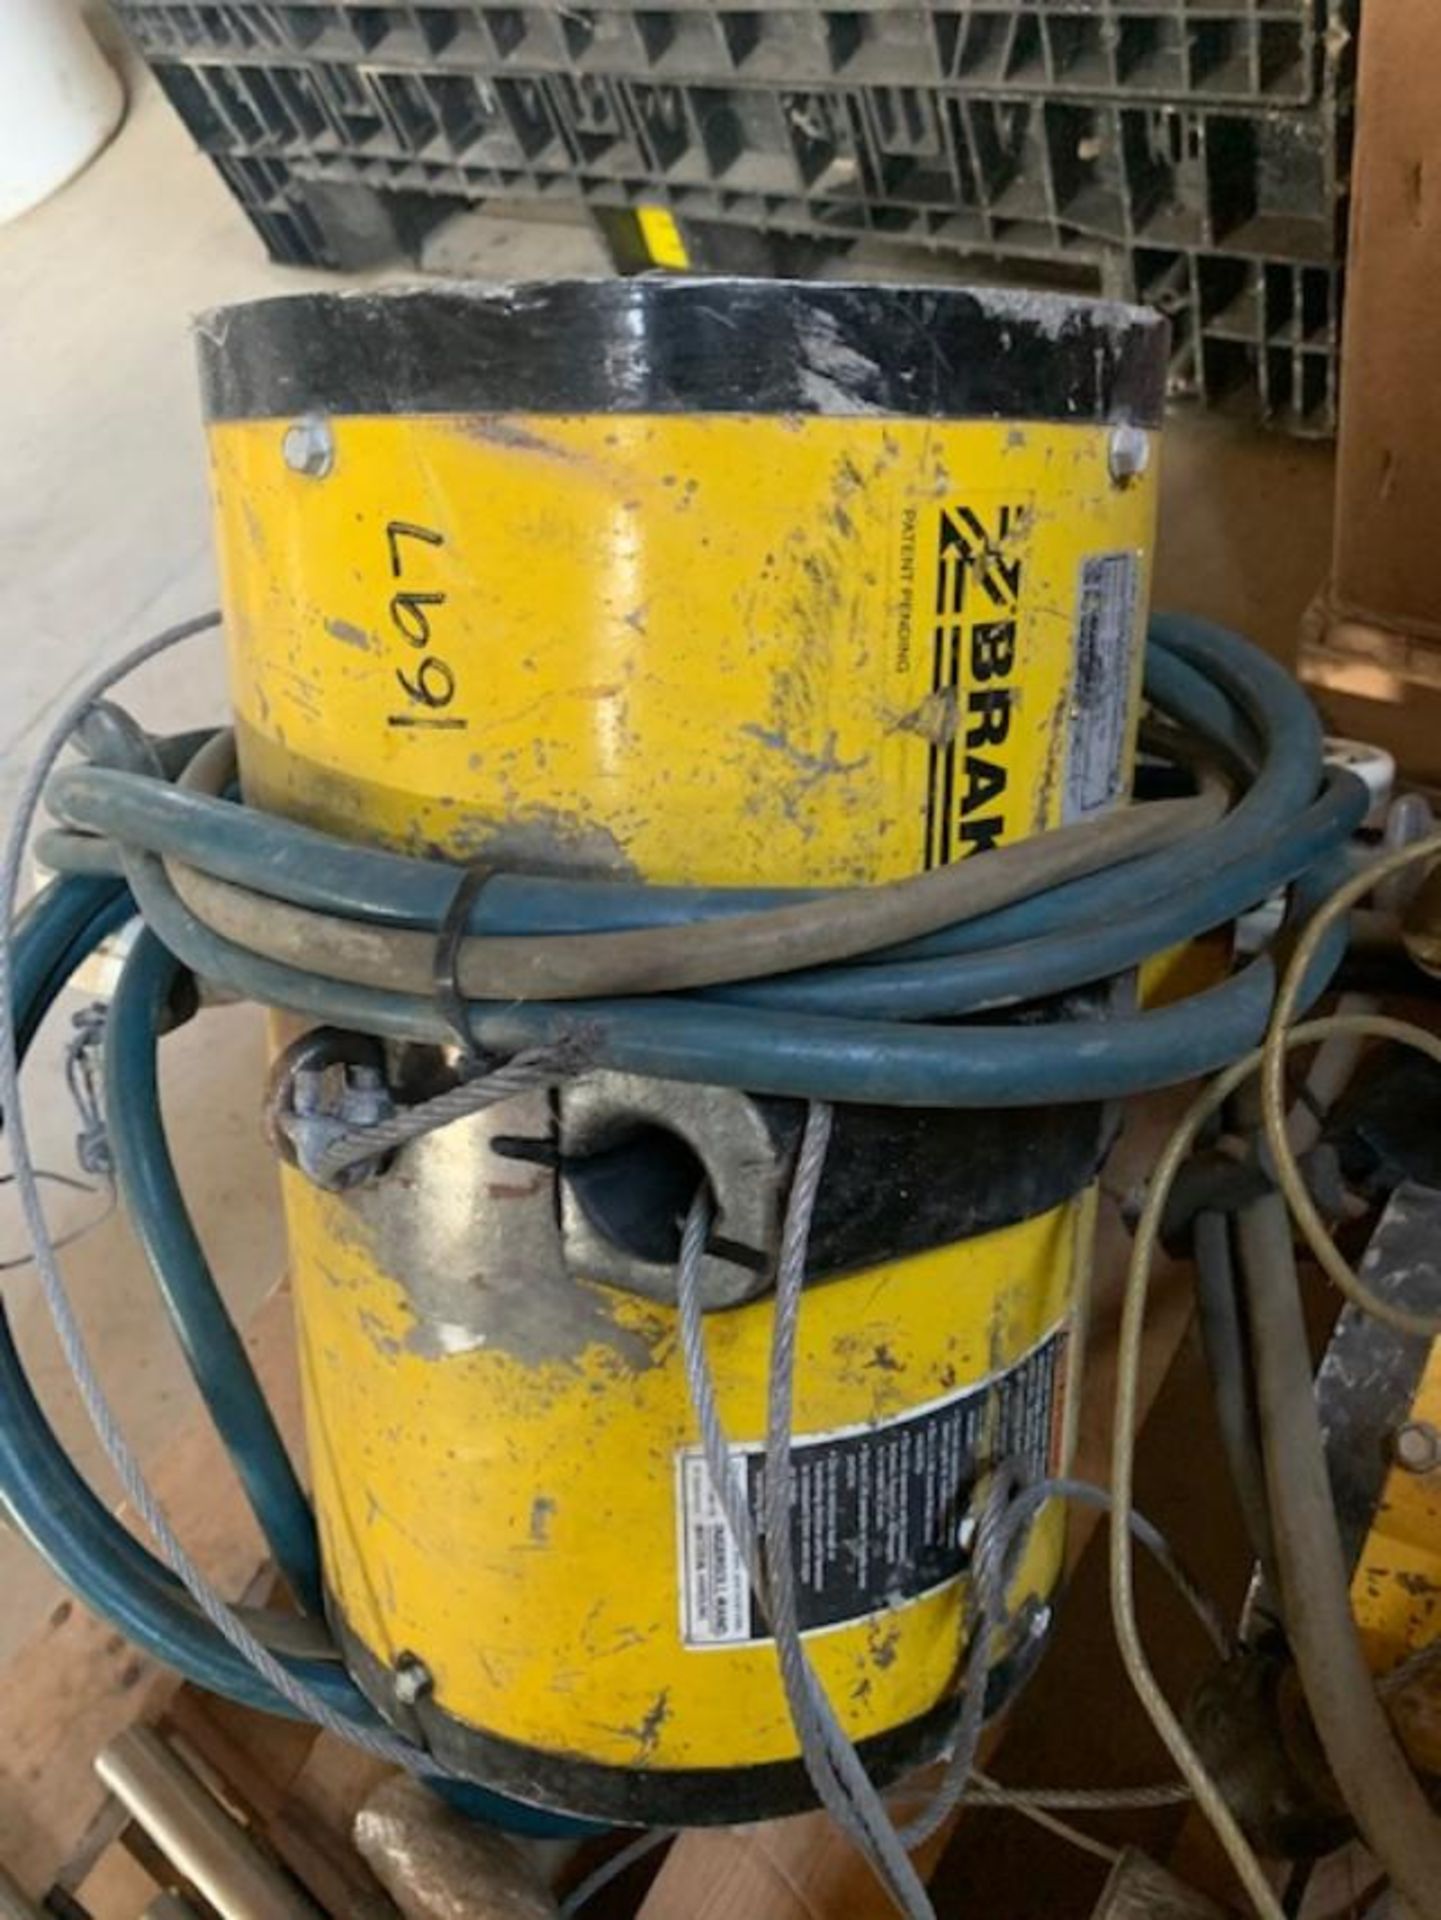 AIR HOISTS, 3 USED INGLESOL RAND AIR HOISTS, 1 USED 575 BROKEN COVER, RIGGING FEE $40.00 - Image 4 of 4